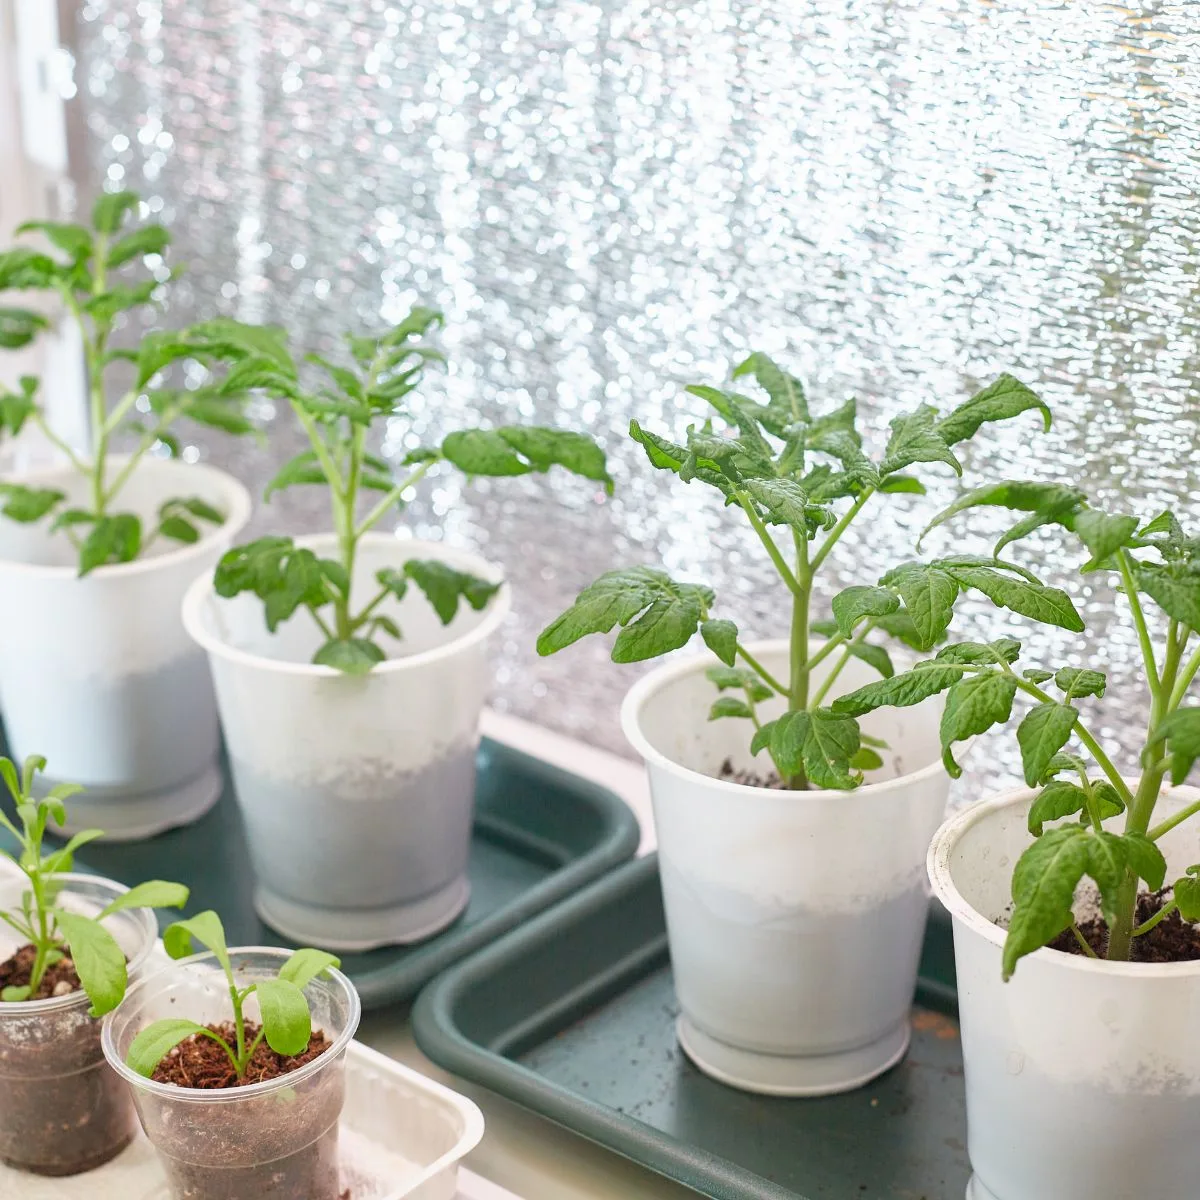 Tomato seedlings in white cups.